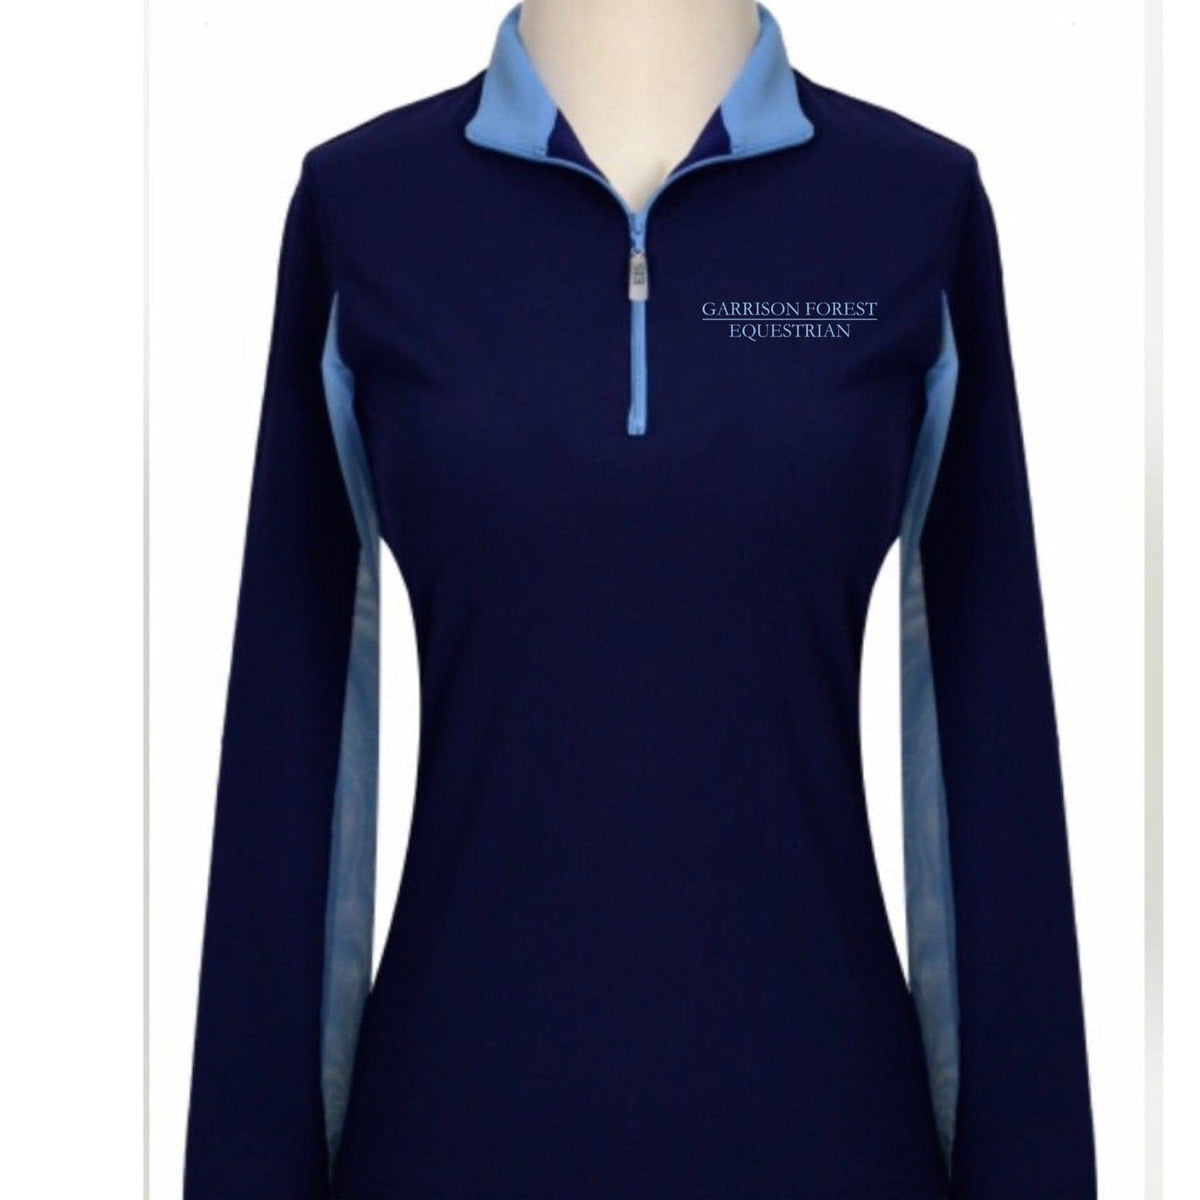 Equestrian Team Apparel Garrison Forest Equestrian Ladies Sun Shirt equestrian team apparel online tack store mobile tack store custom farm apparel custom show stable clothing equestrian lifestyle horse show clothing riding clothes horses equestrian tack store